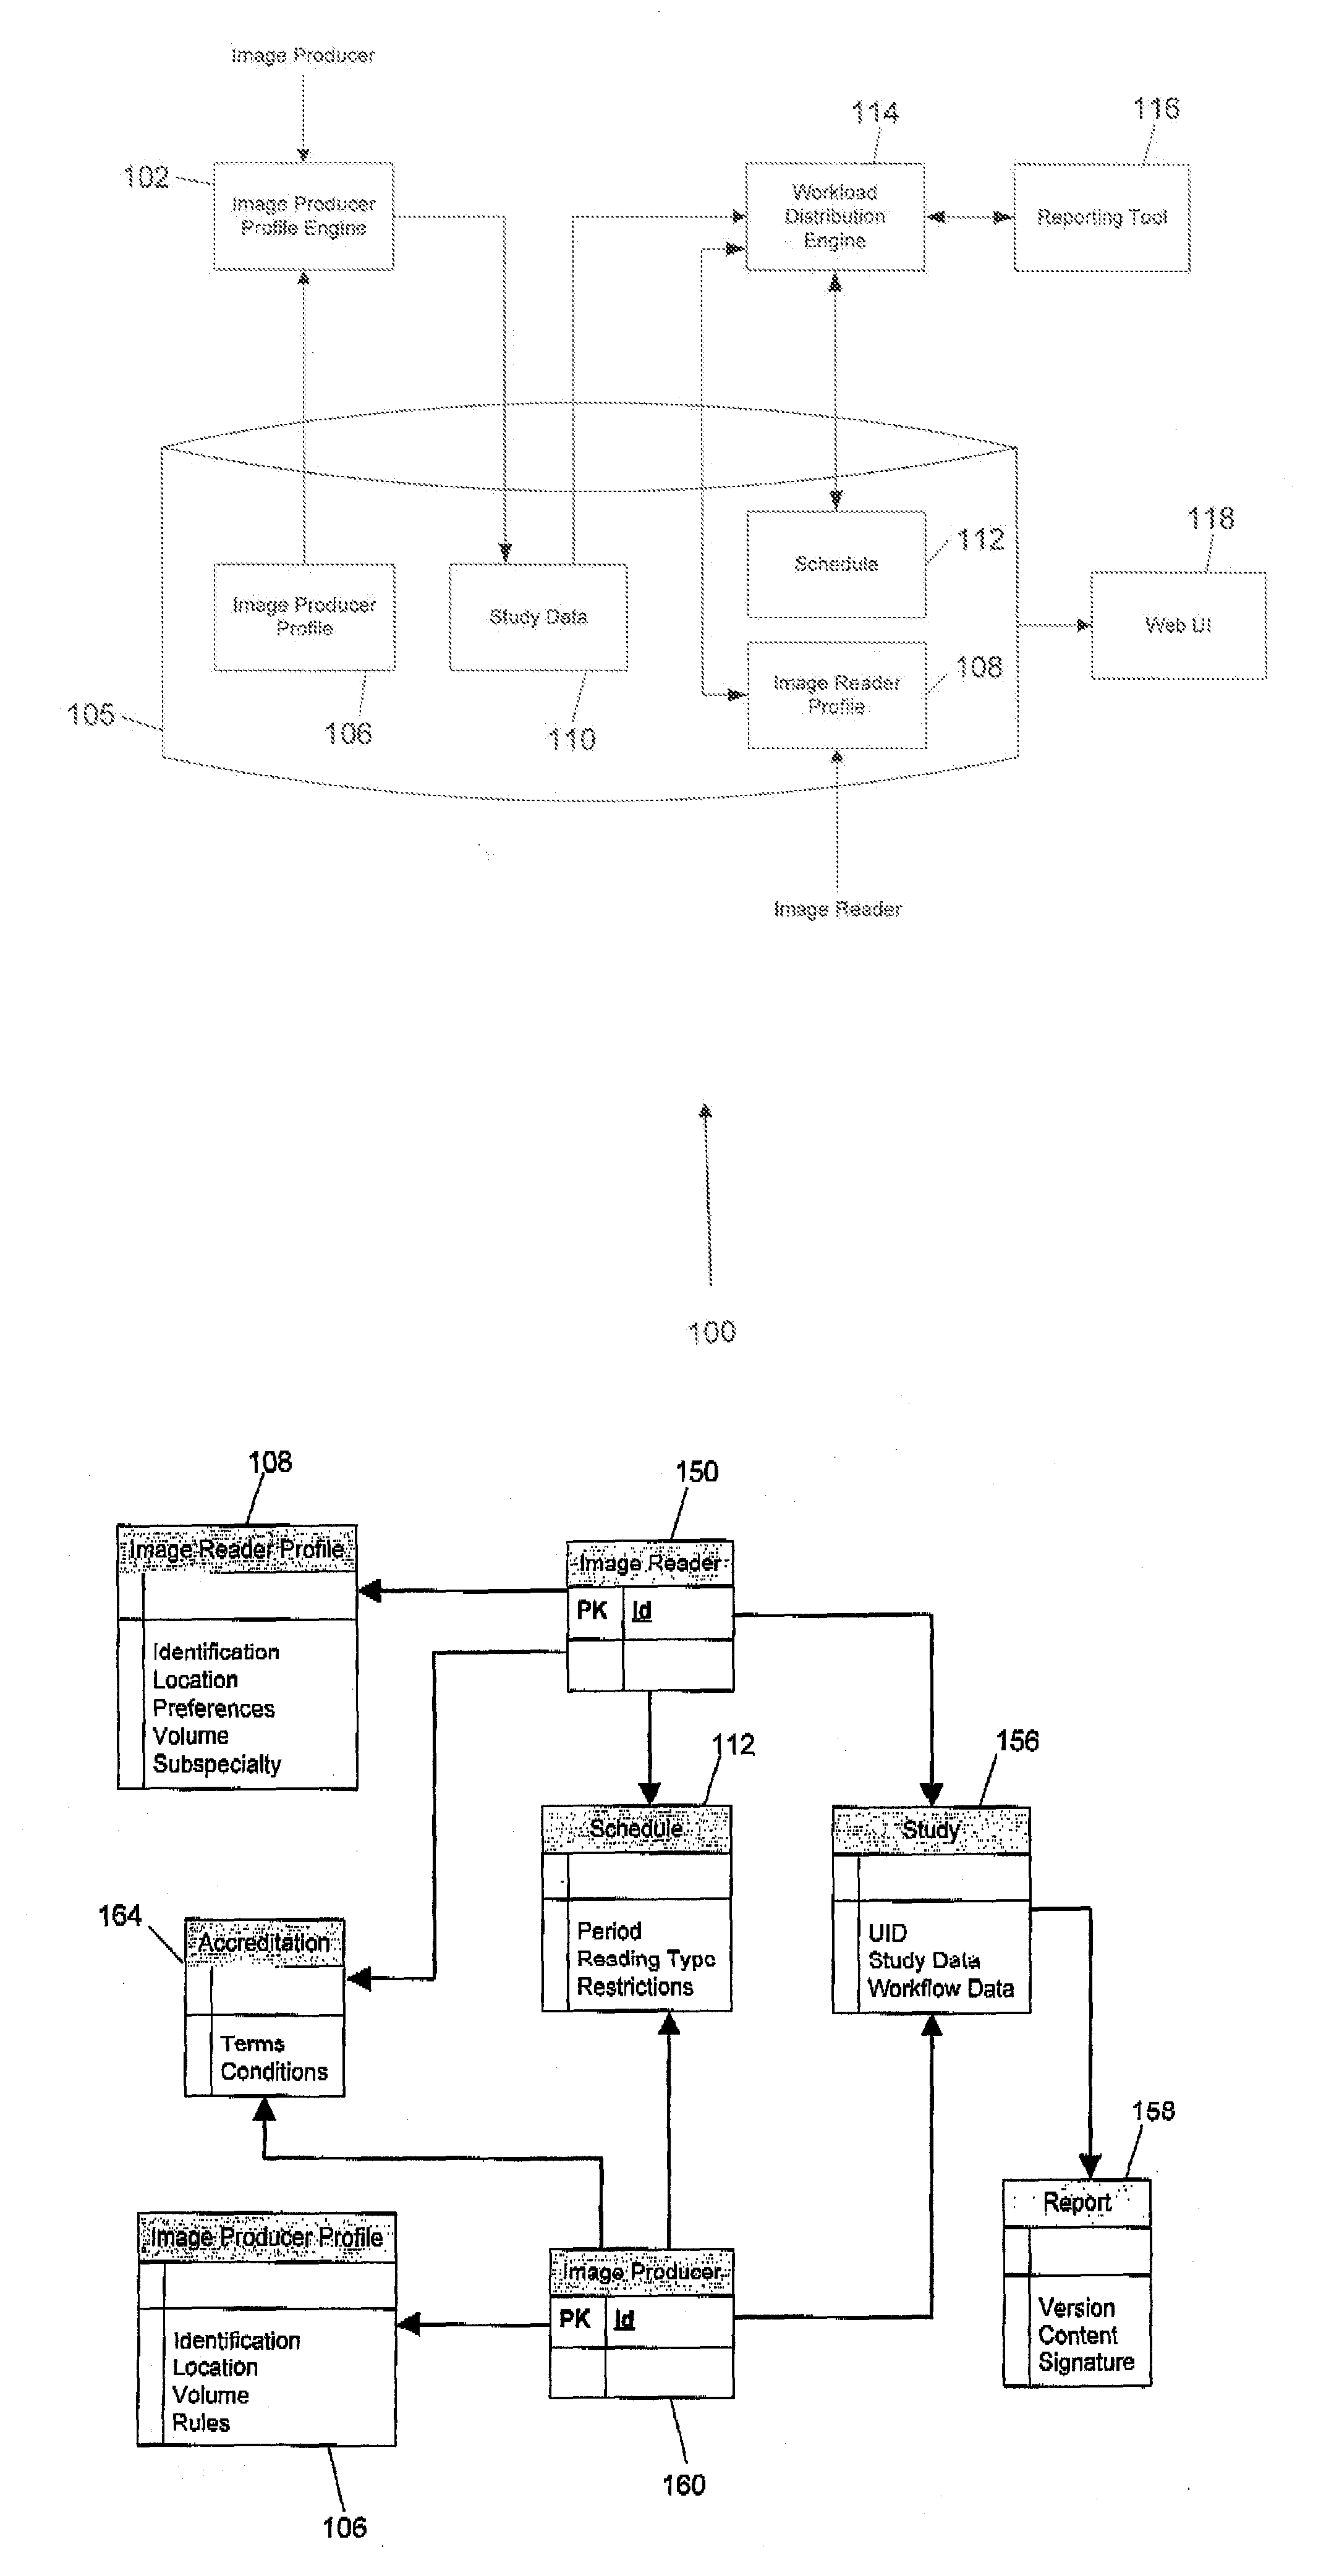 System and method for management and distribution of diagnostic imaging